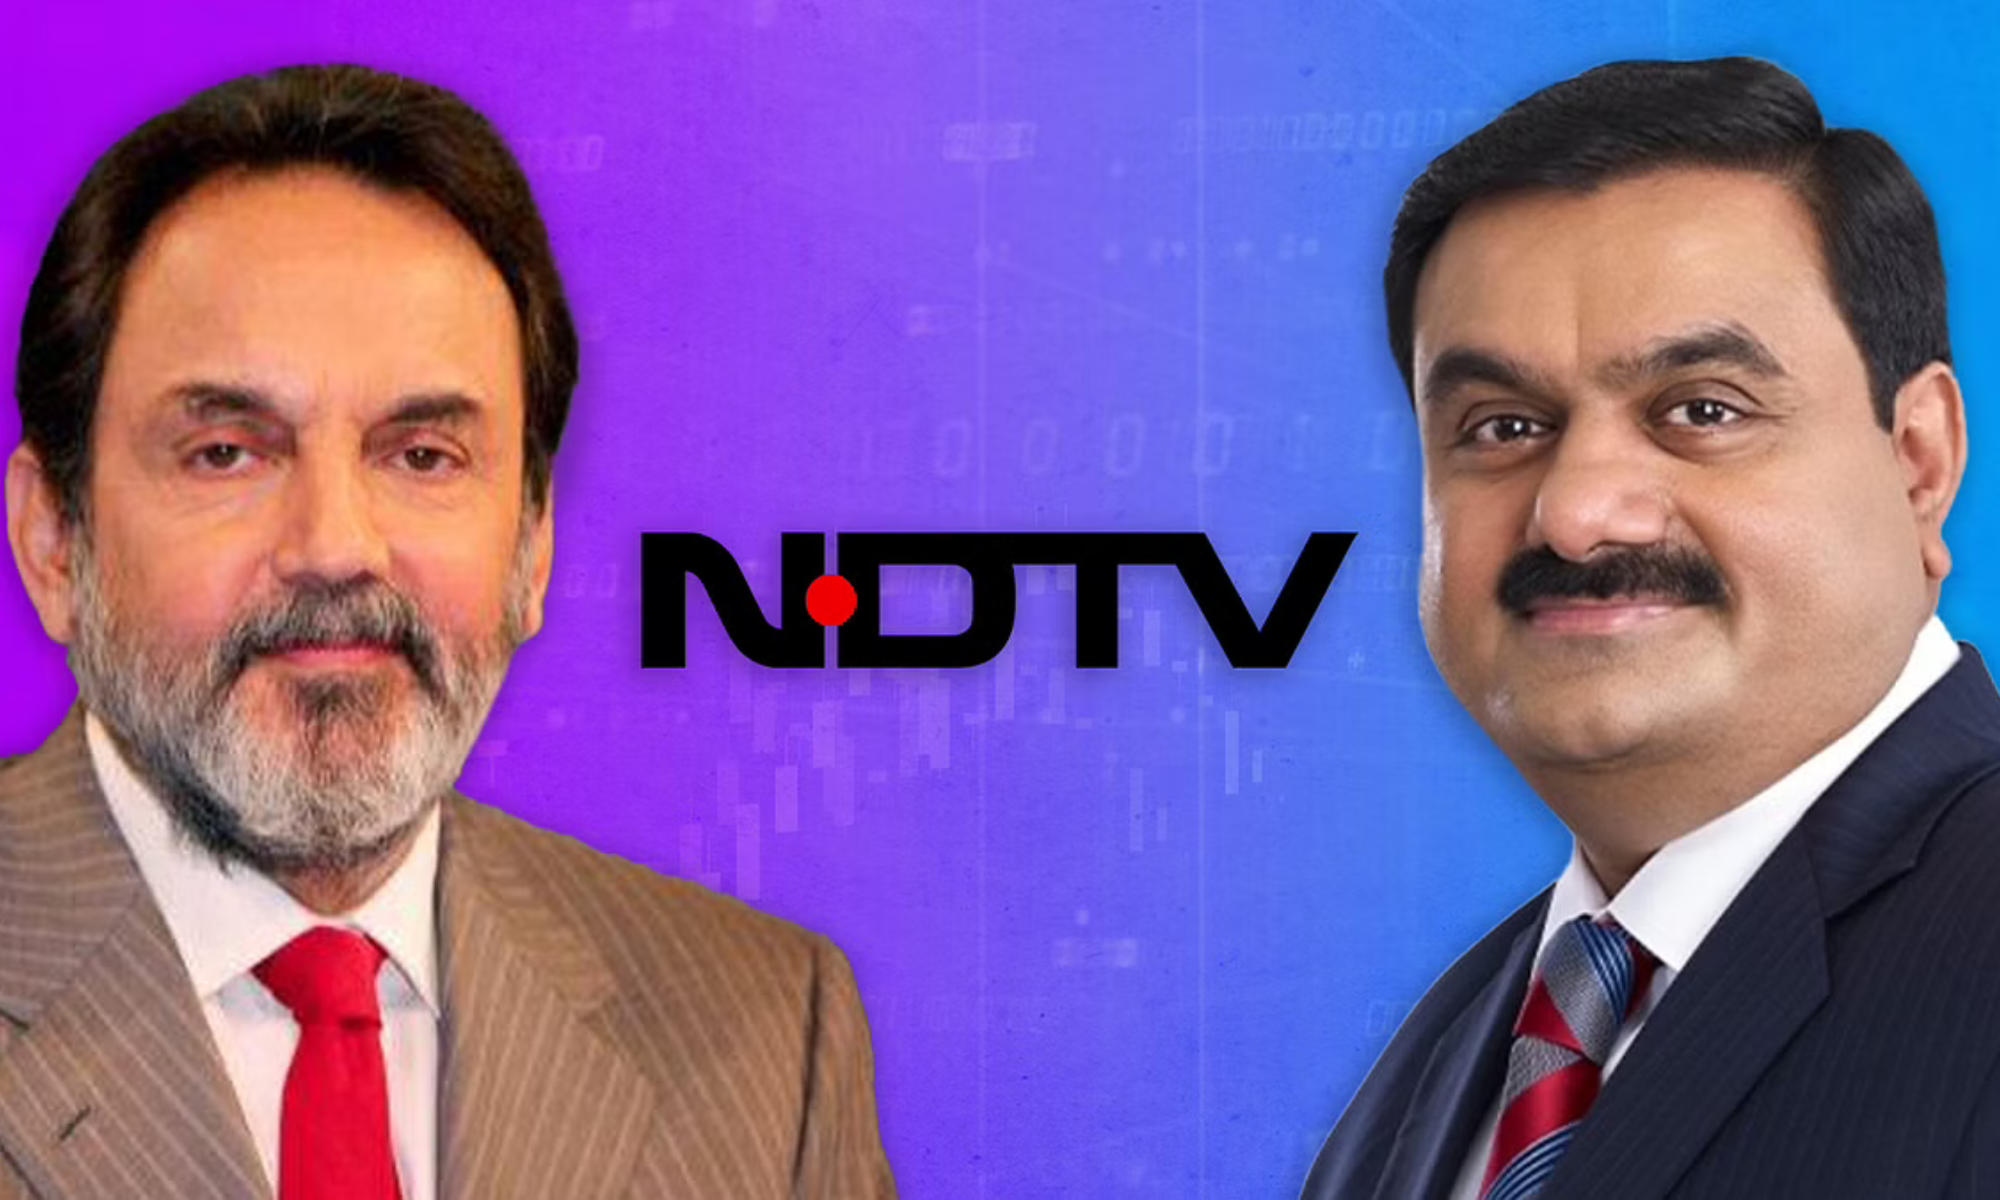 Adani to acquire NDTV, Prannoy Roy could lose ownership_40.1